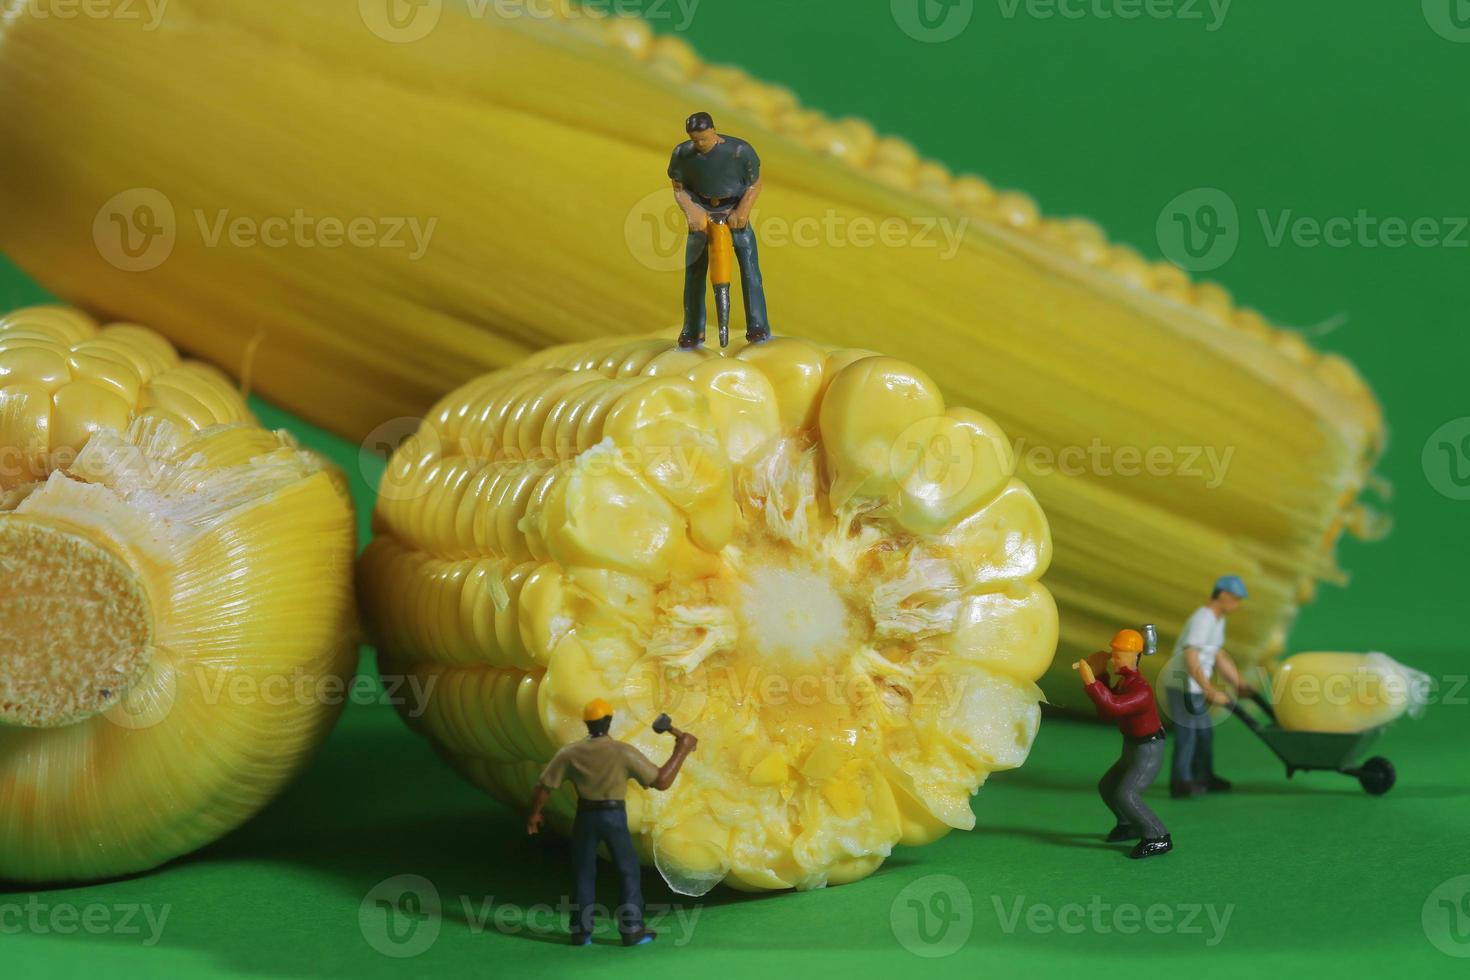 Miniature Construction Workers in Conceptual Food Imagery With Corn photo